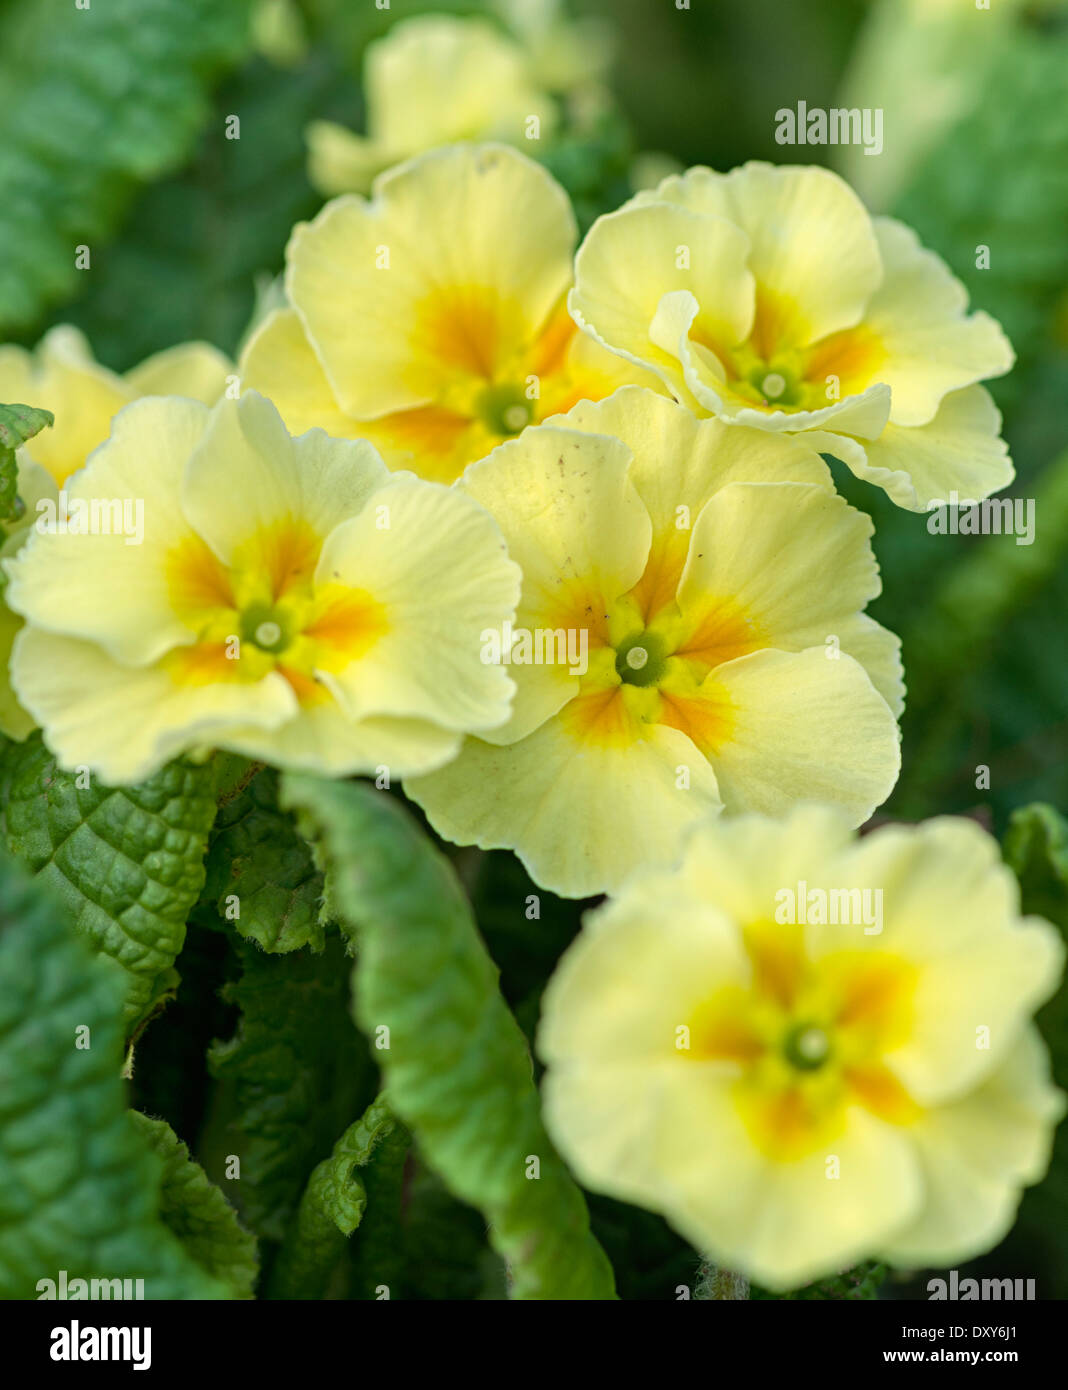 A group of yellow primrose flowers shot at close range in the Cumbrian spring sunshine Stock Photo